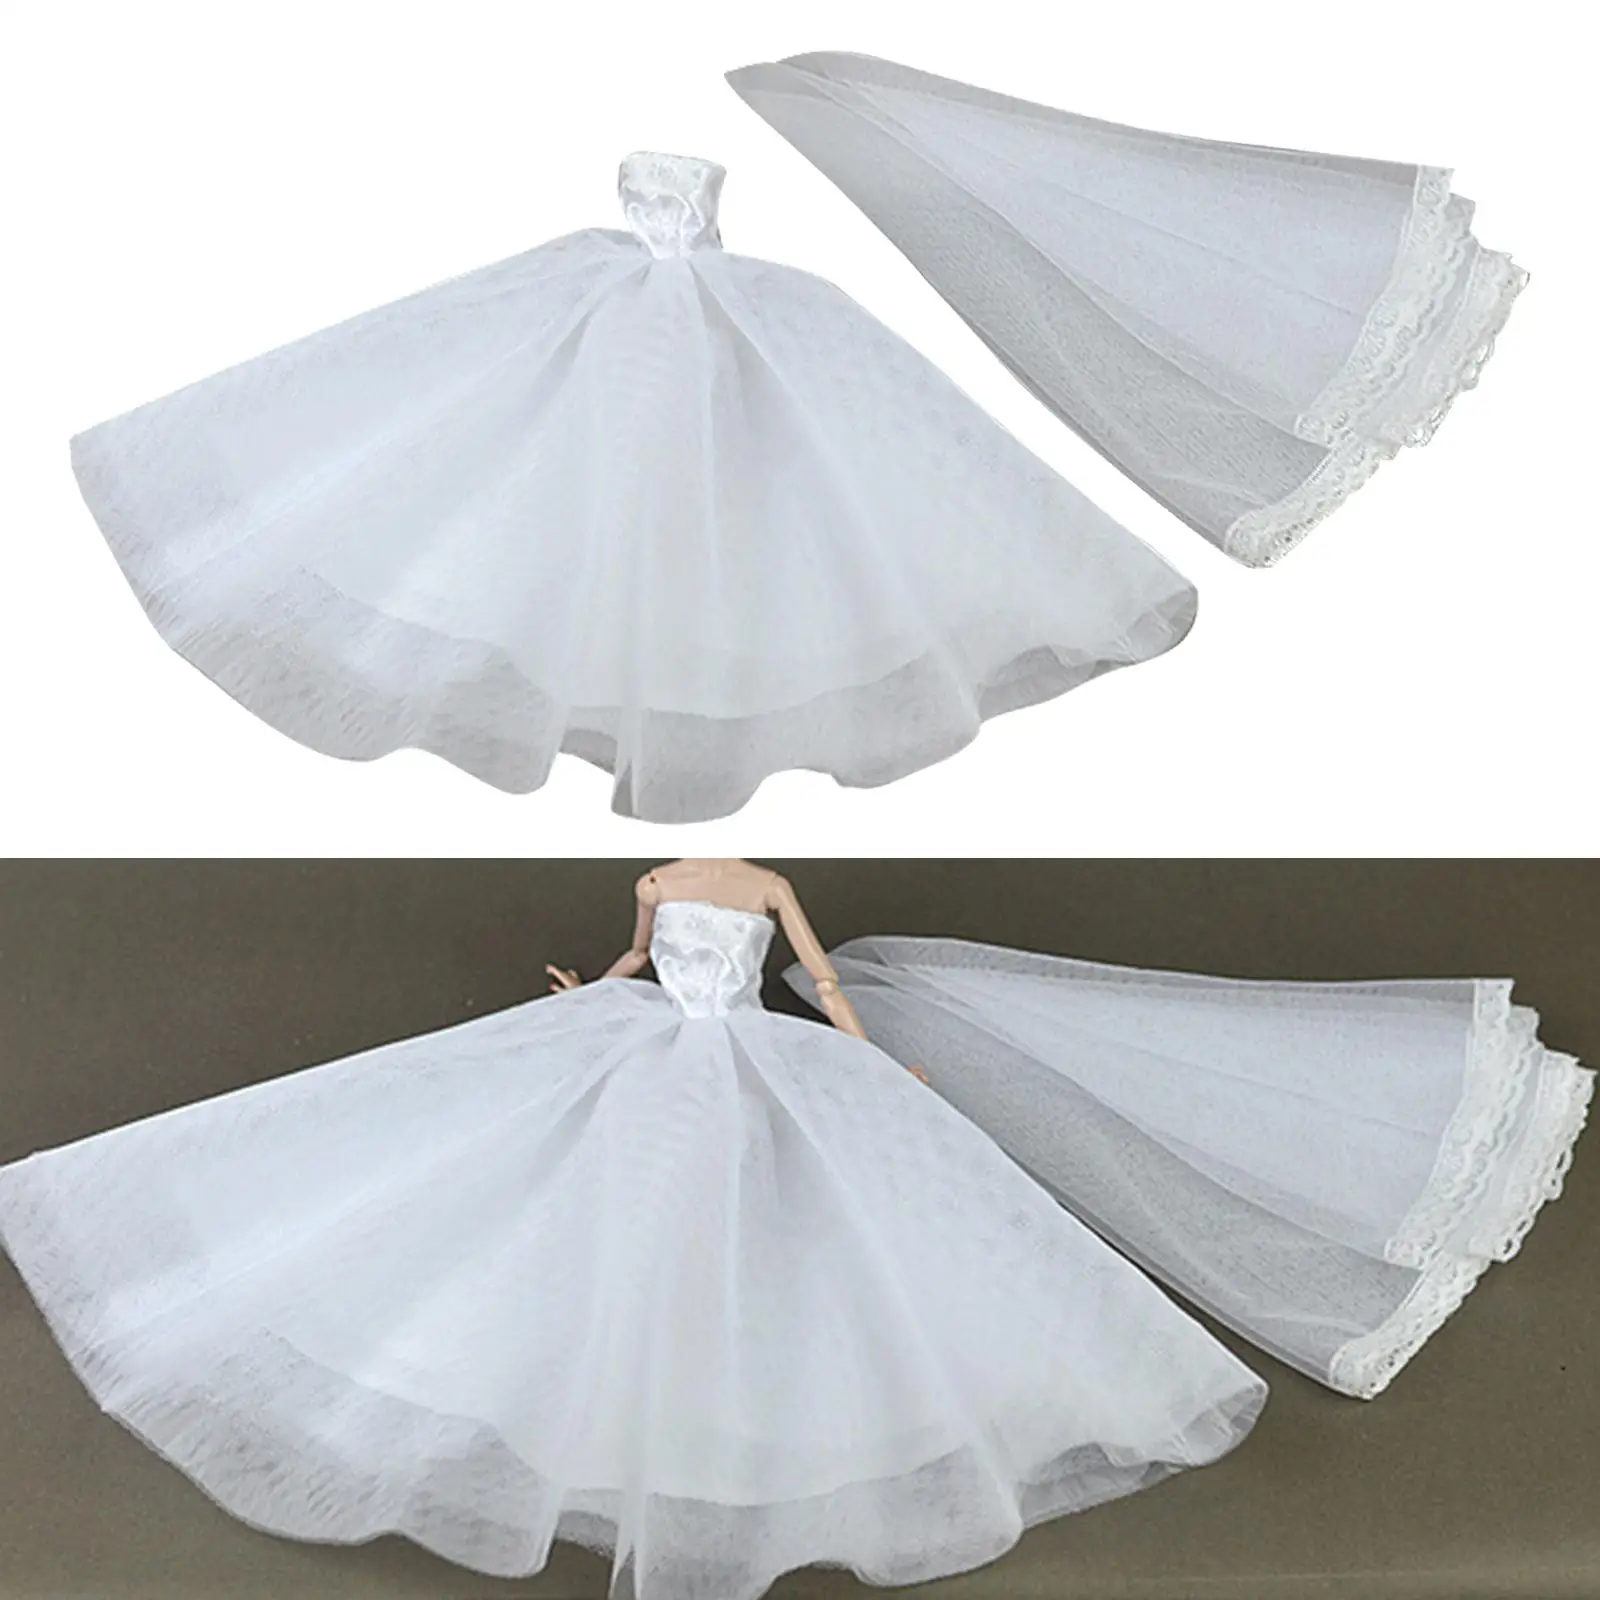 Fashion 1/6 Dolls Wedding Dress, Dolls Gown Dress, Evening Party Clothes Outfits for 12inch Dolls Clothing Dress